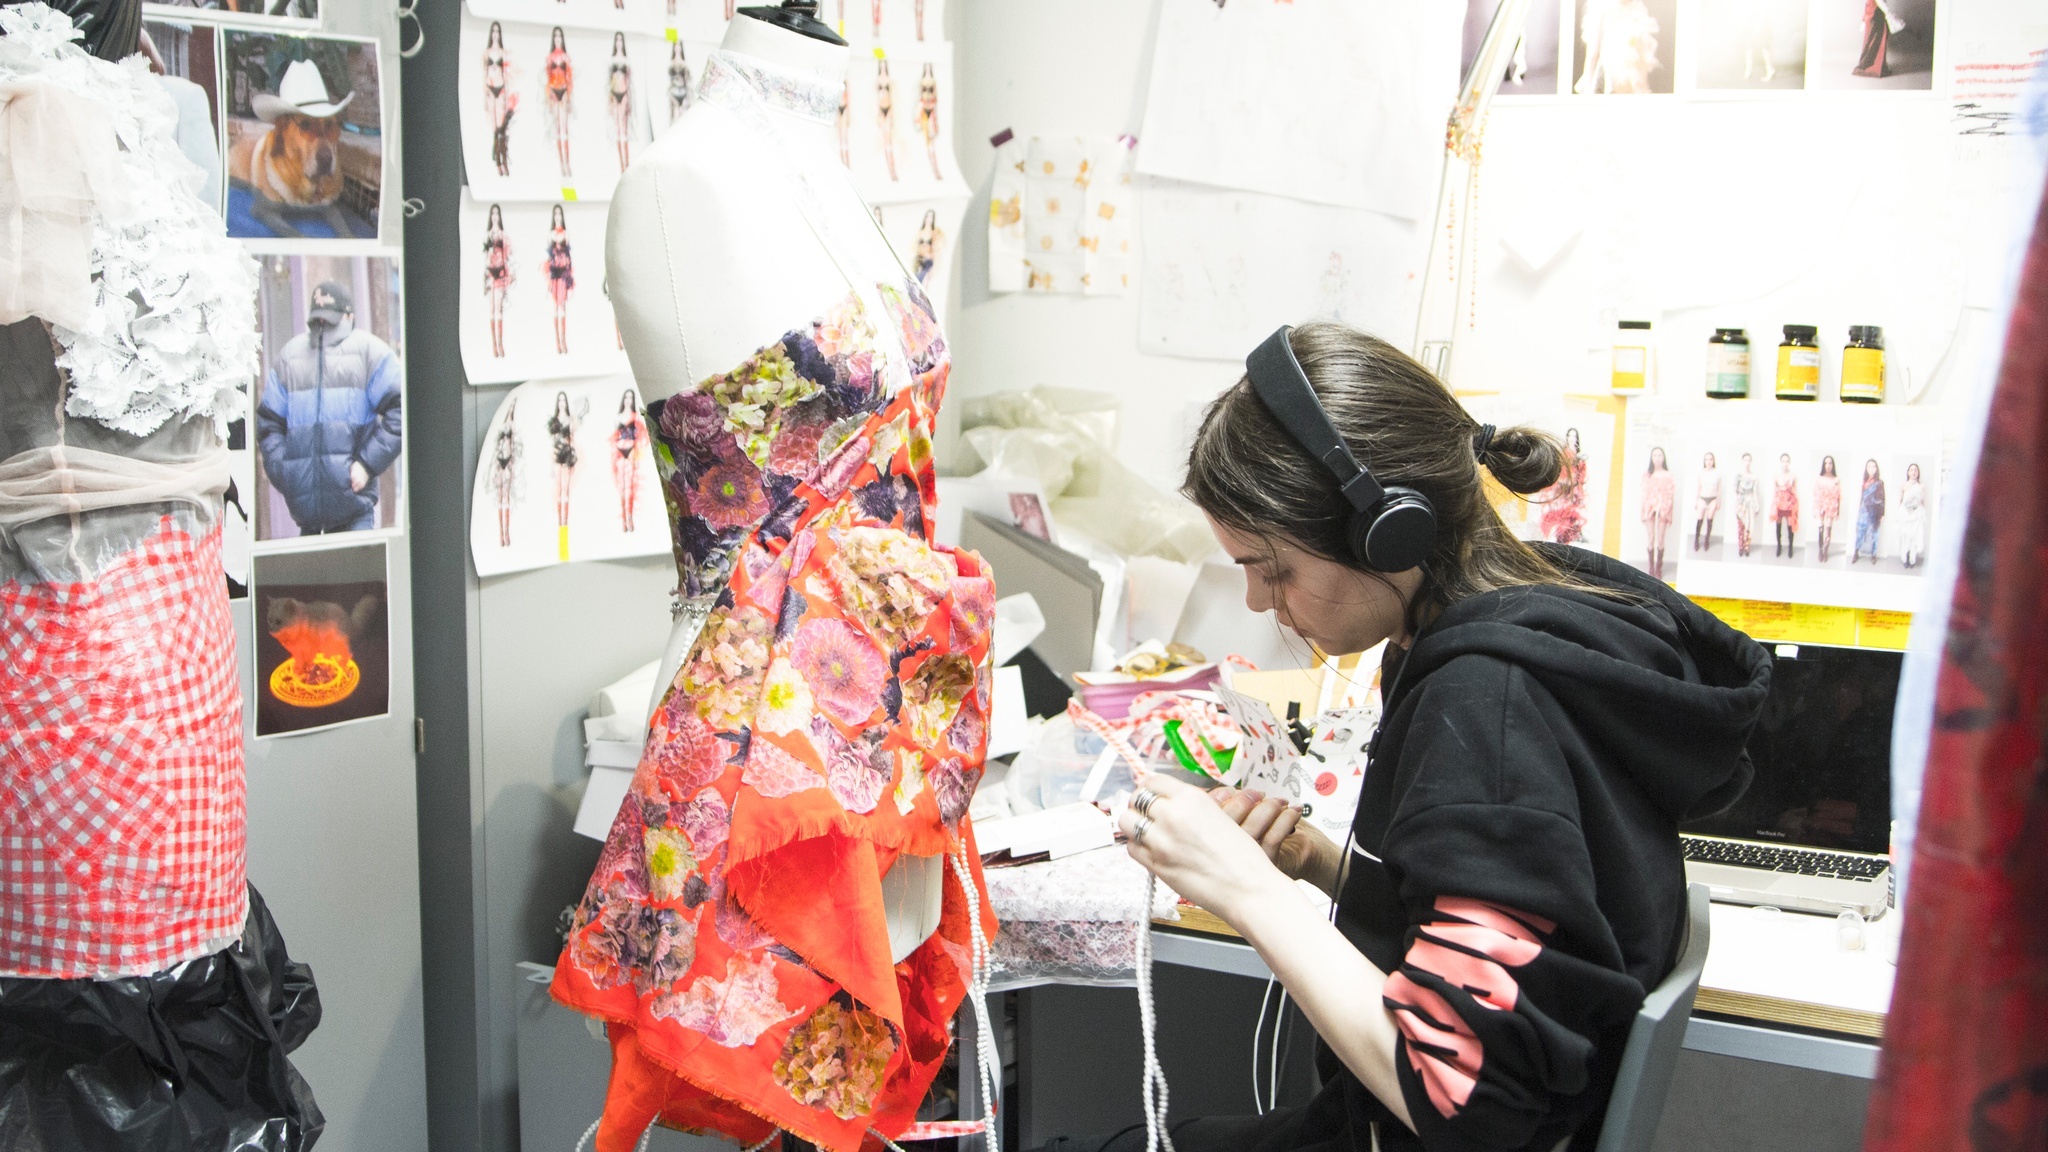 A fashion and costume design student at her place of work. Photo: Live Schille